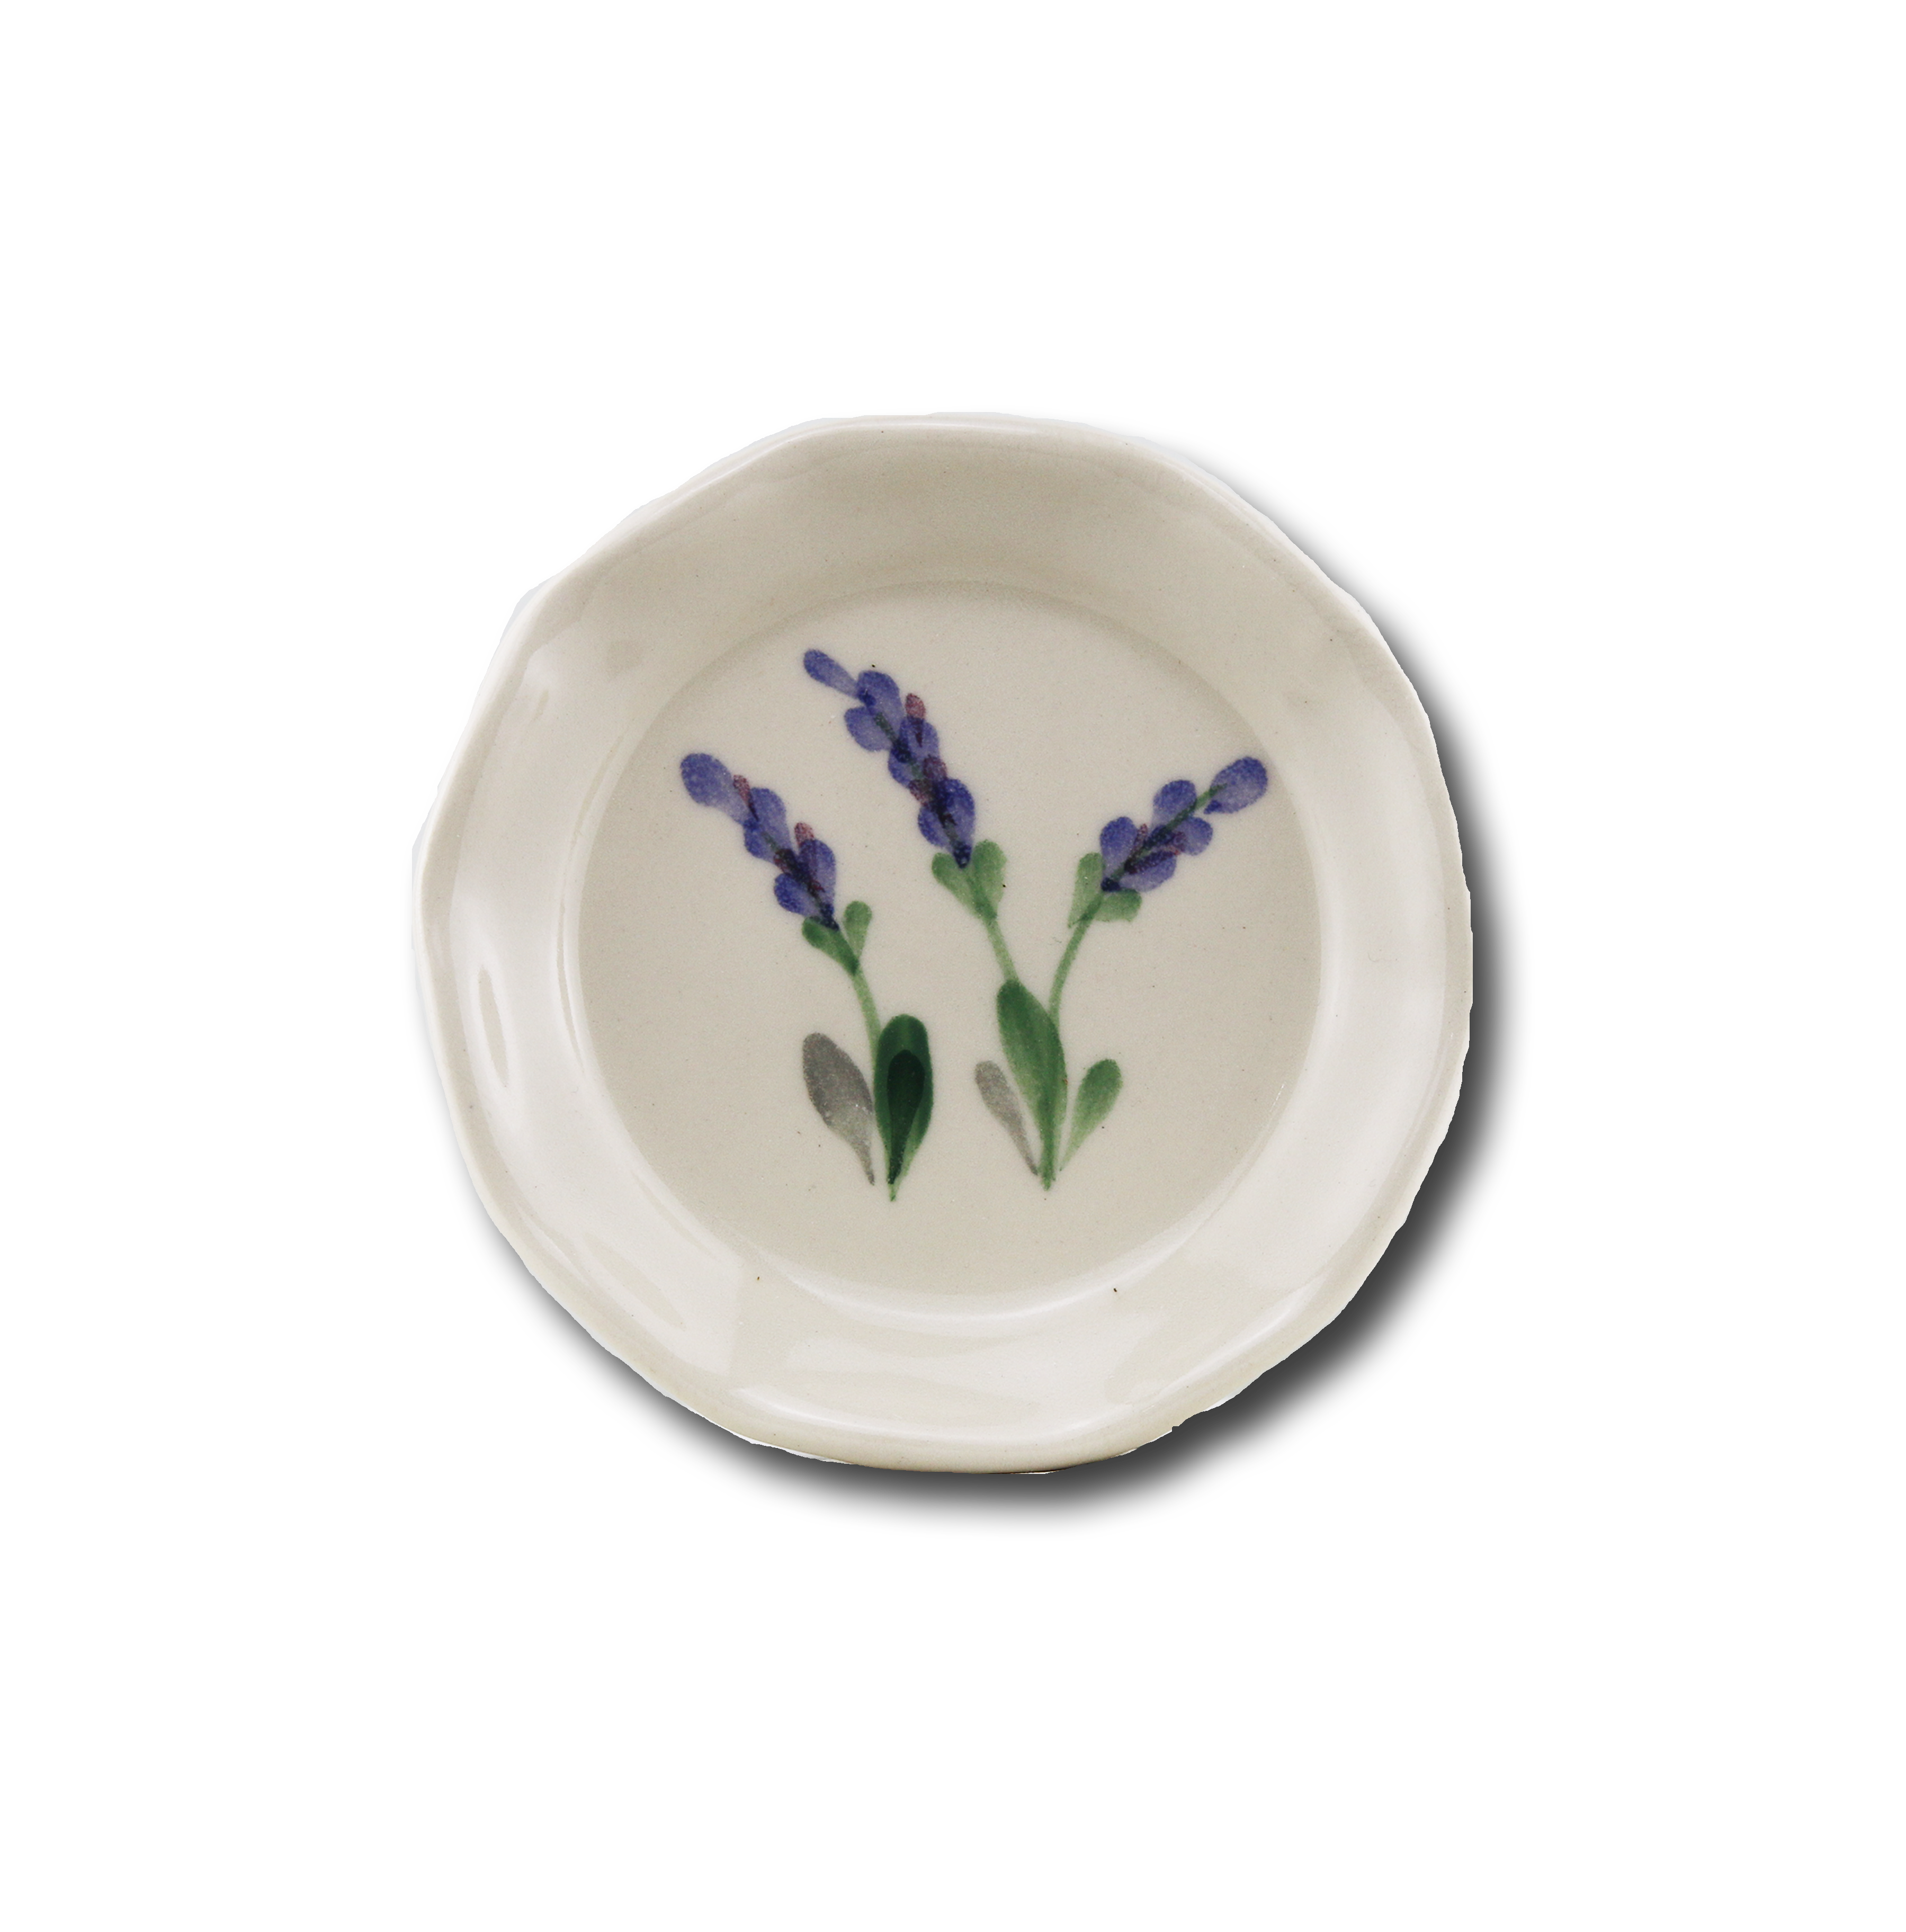 Emerson Creek Pottery Hand-painted Dipping Dish